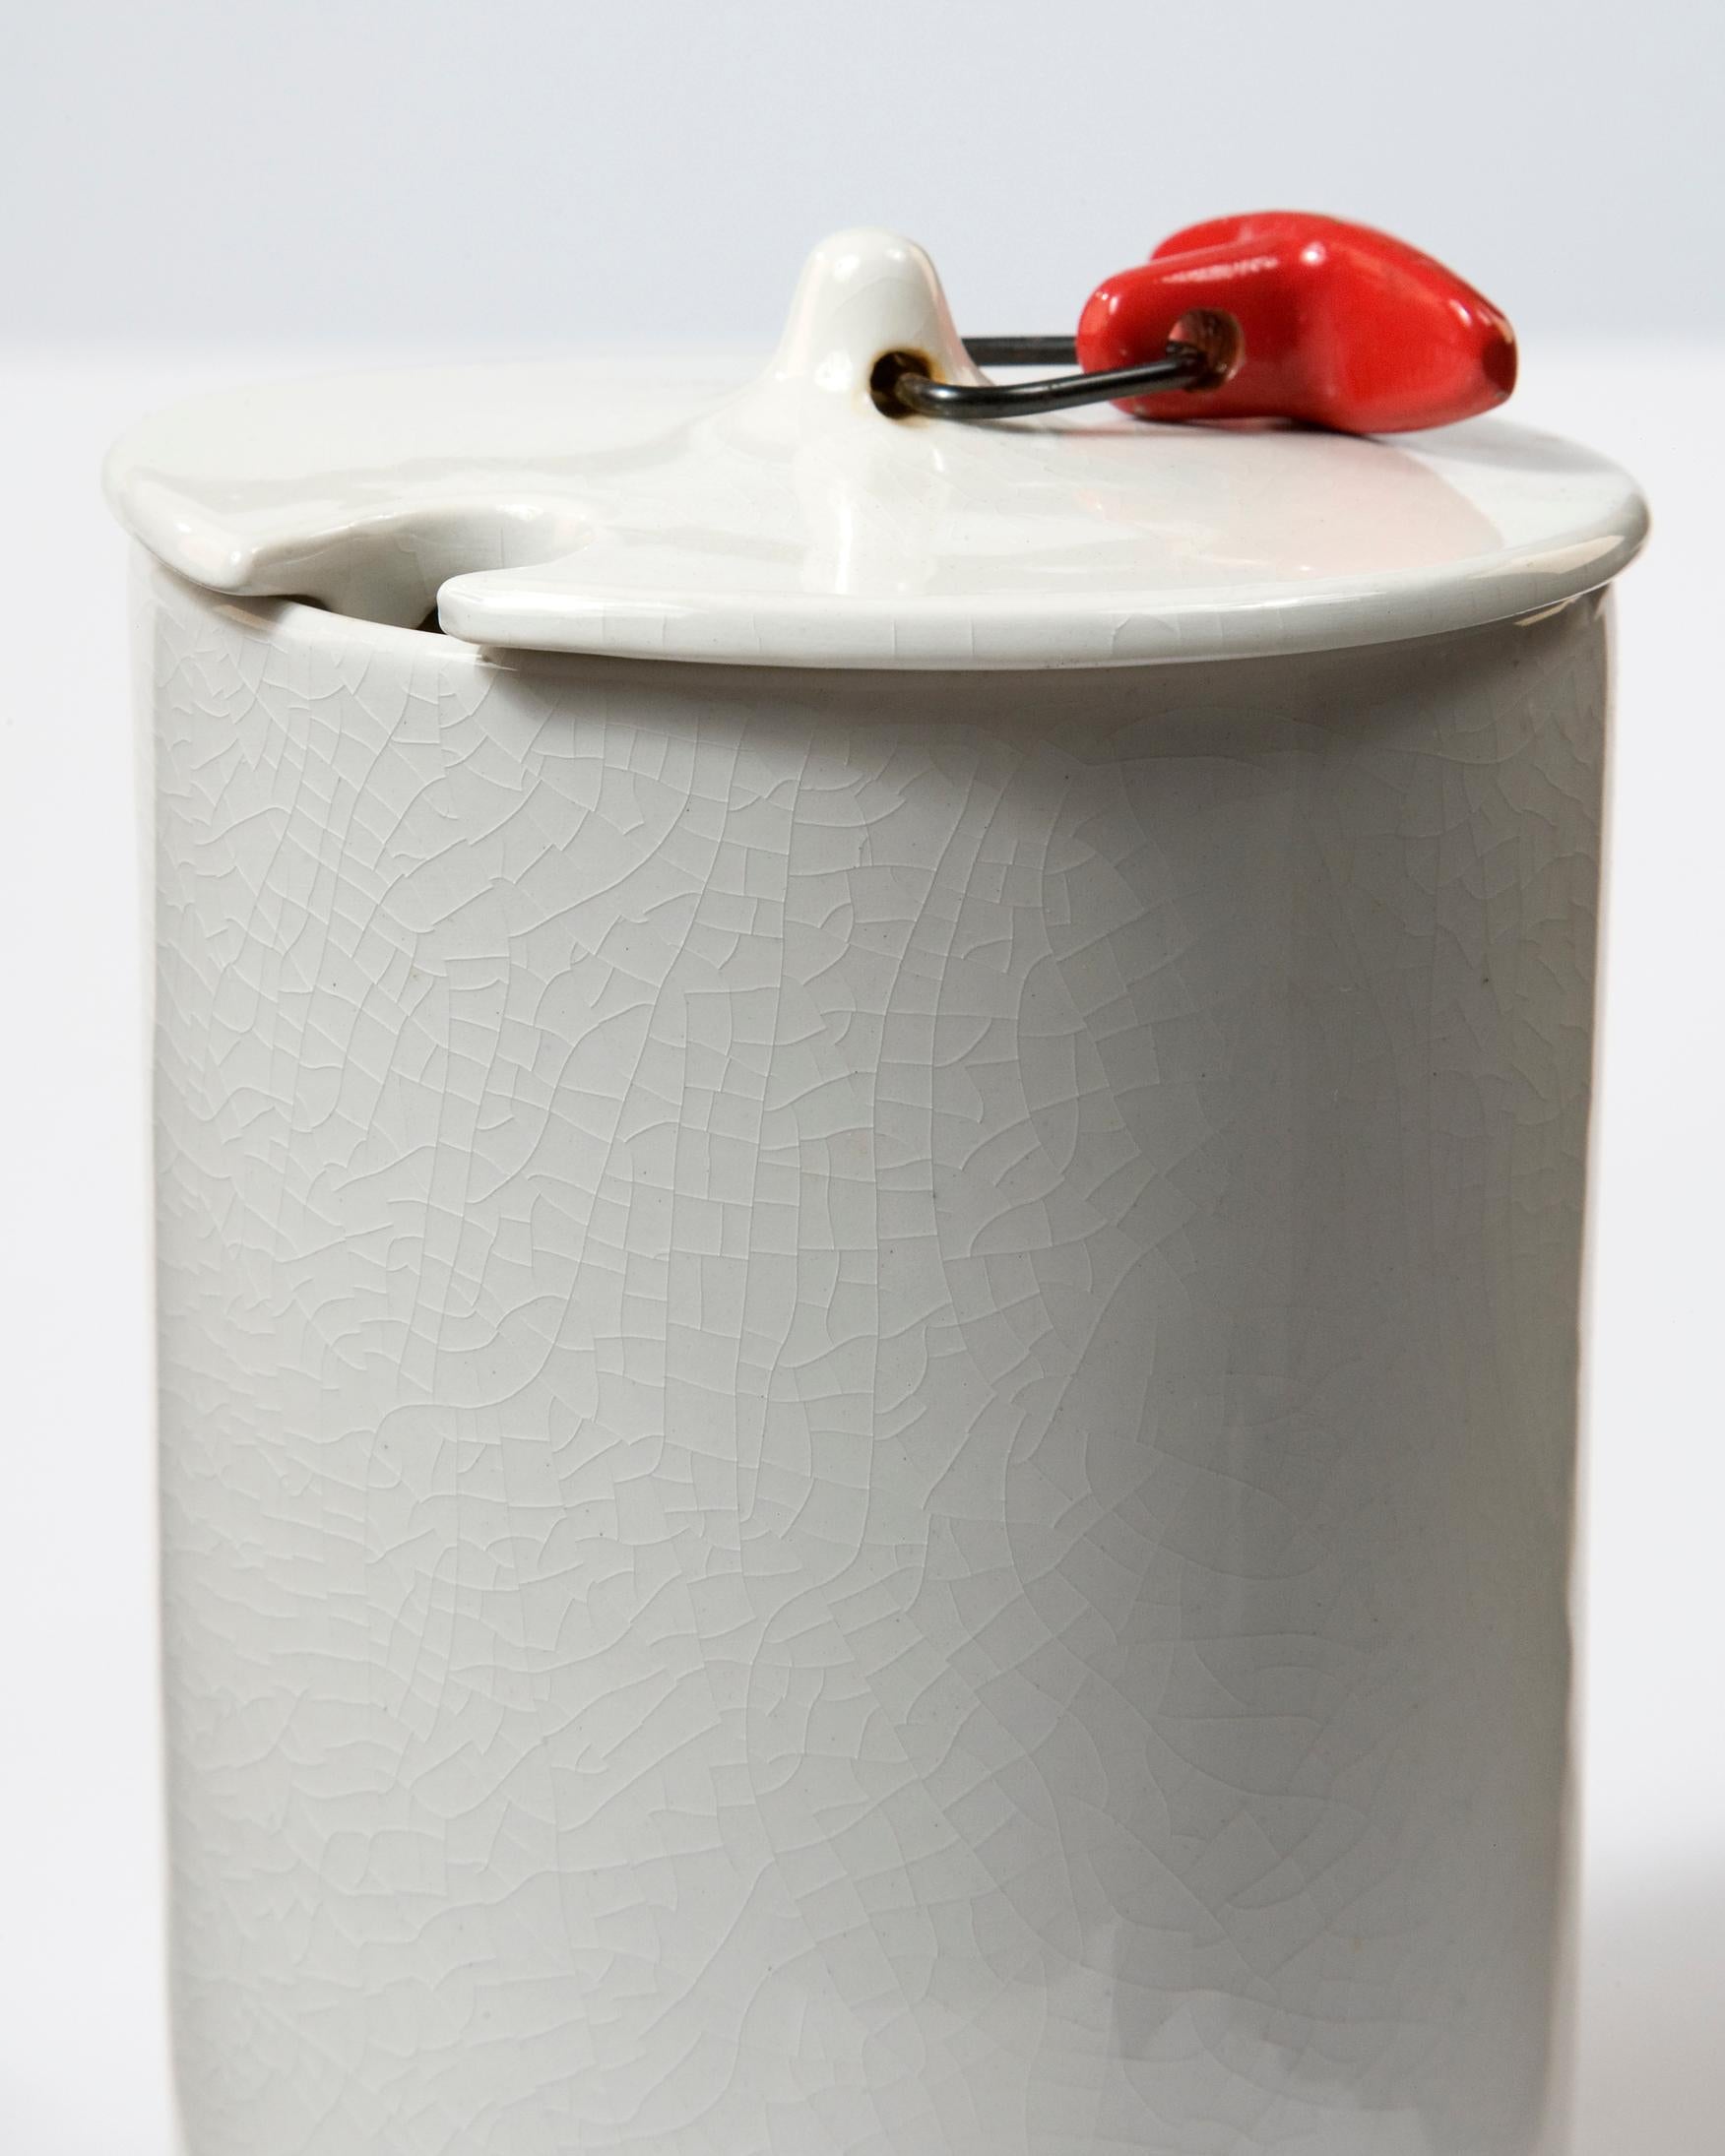 Japanese Set of Two White Ceramic Canisters by La Gardo Tackett